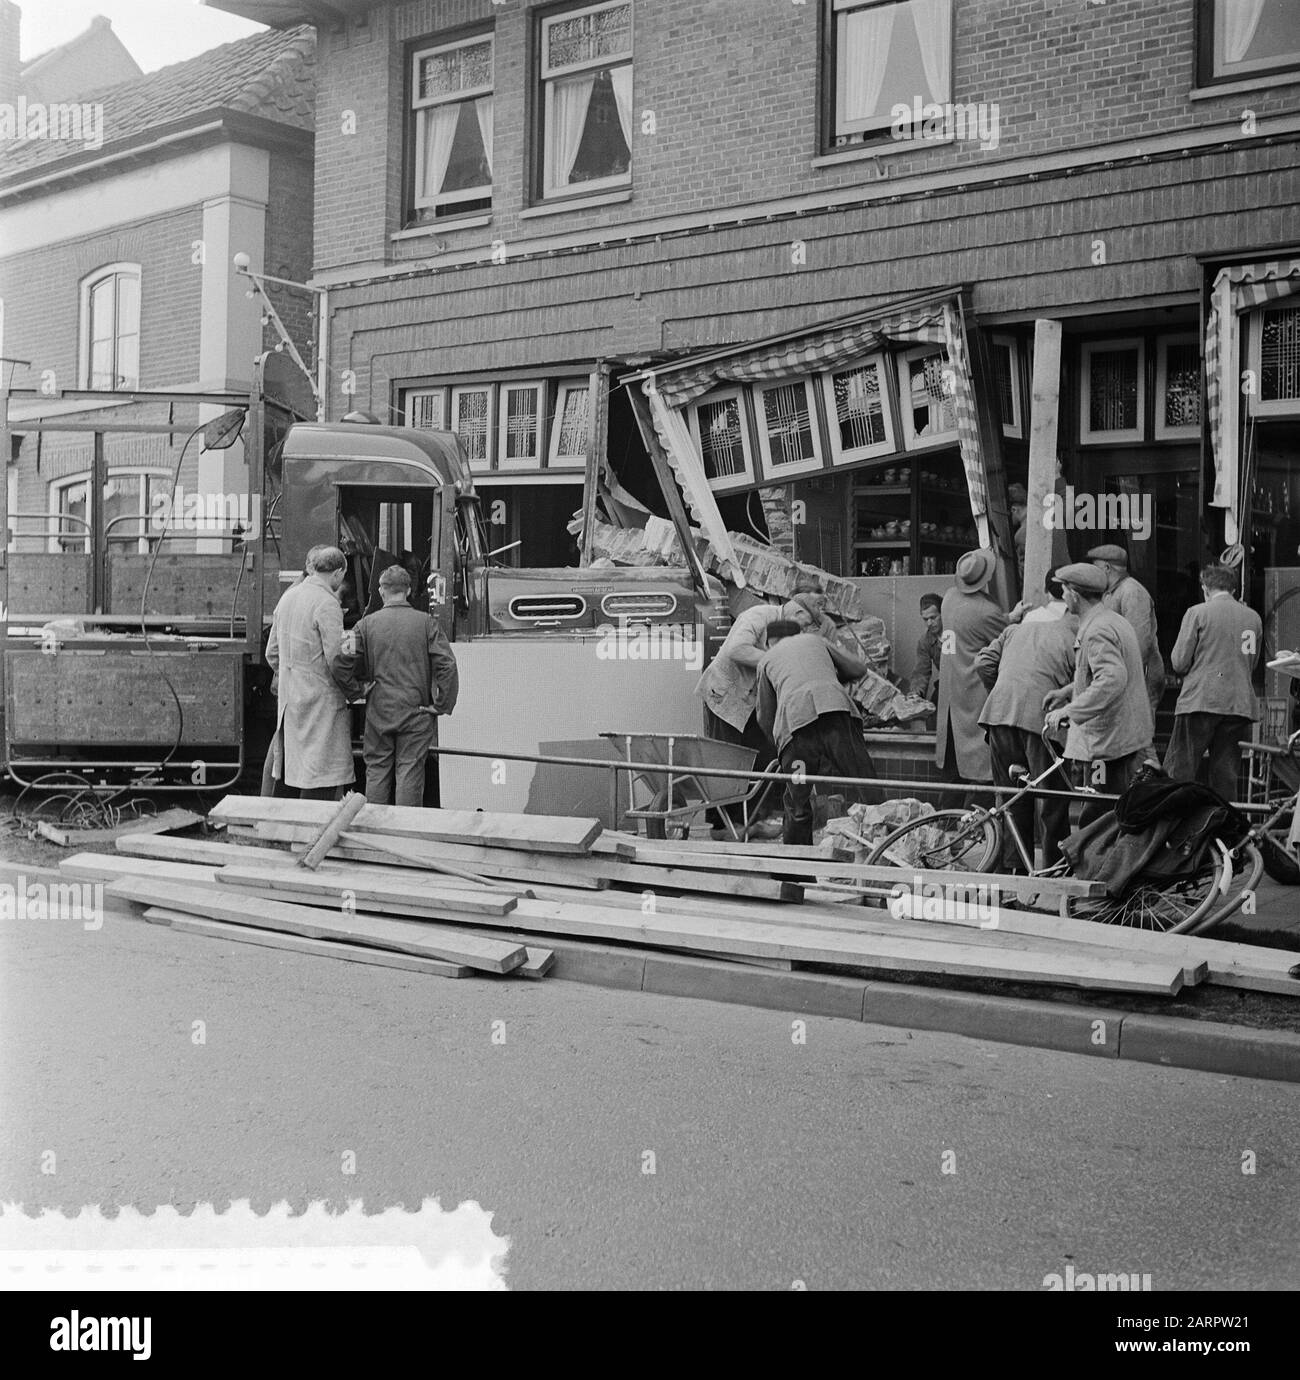 Sturcked, because he suddenly saw a passenger car coming from the right, the driver of a truck in the Dorpsstraat in Heerde threw the wheel to the left, hit a sidewalk and lost power over the wheel. The 17 ton sheet iron truck was loaded into a hardware and household goods store. Nobody from the store got hurt. The 32-year-old driver got out with the fright. His co-driver broke both lower legs Date: 5 april 1957 Location: Gelderland, Heerde Keywords: accidents, traffic, trucks, shops Stock Photo